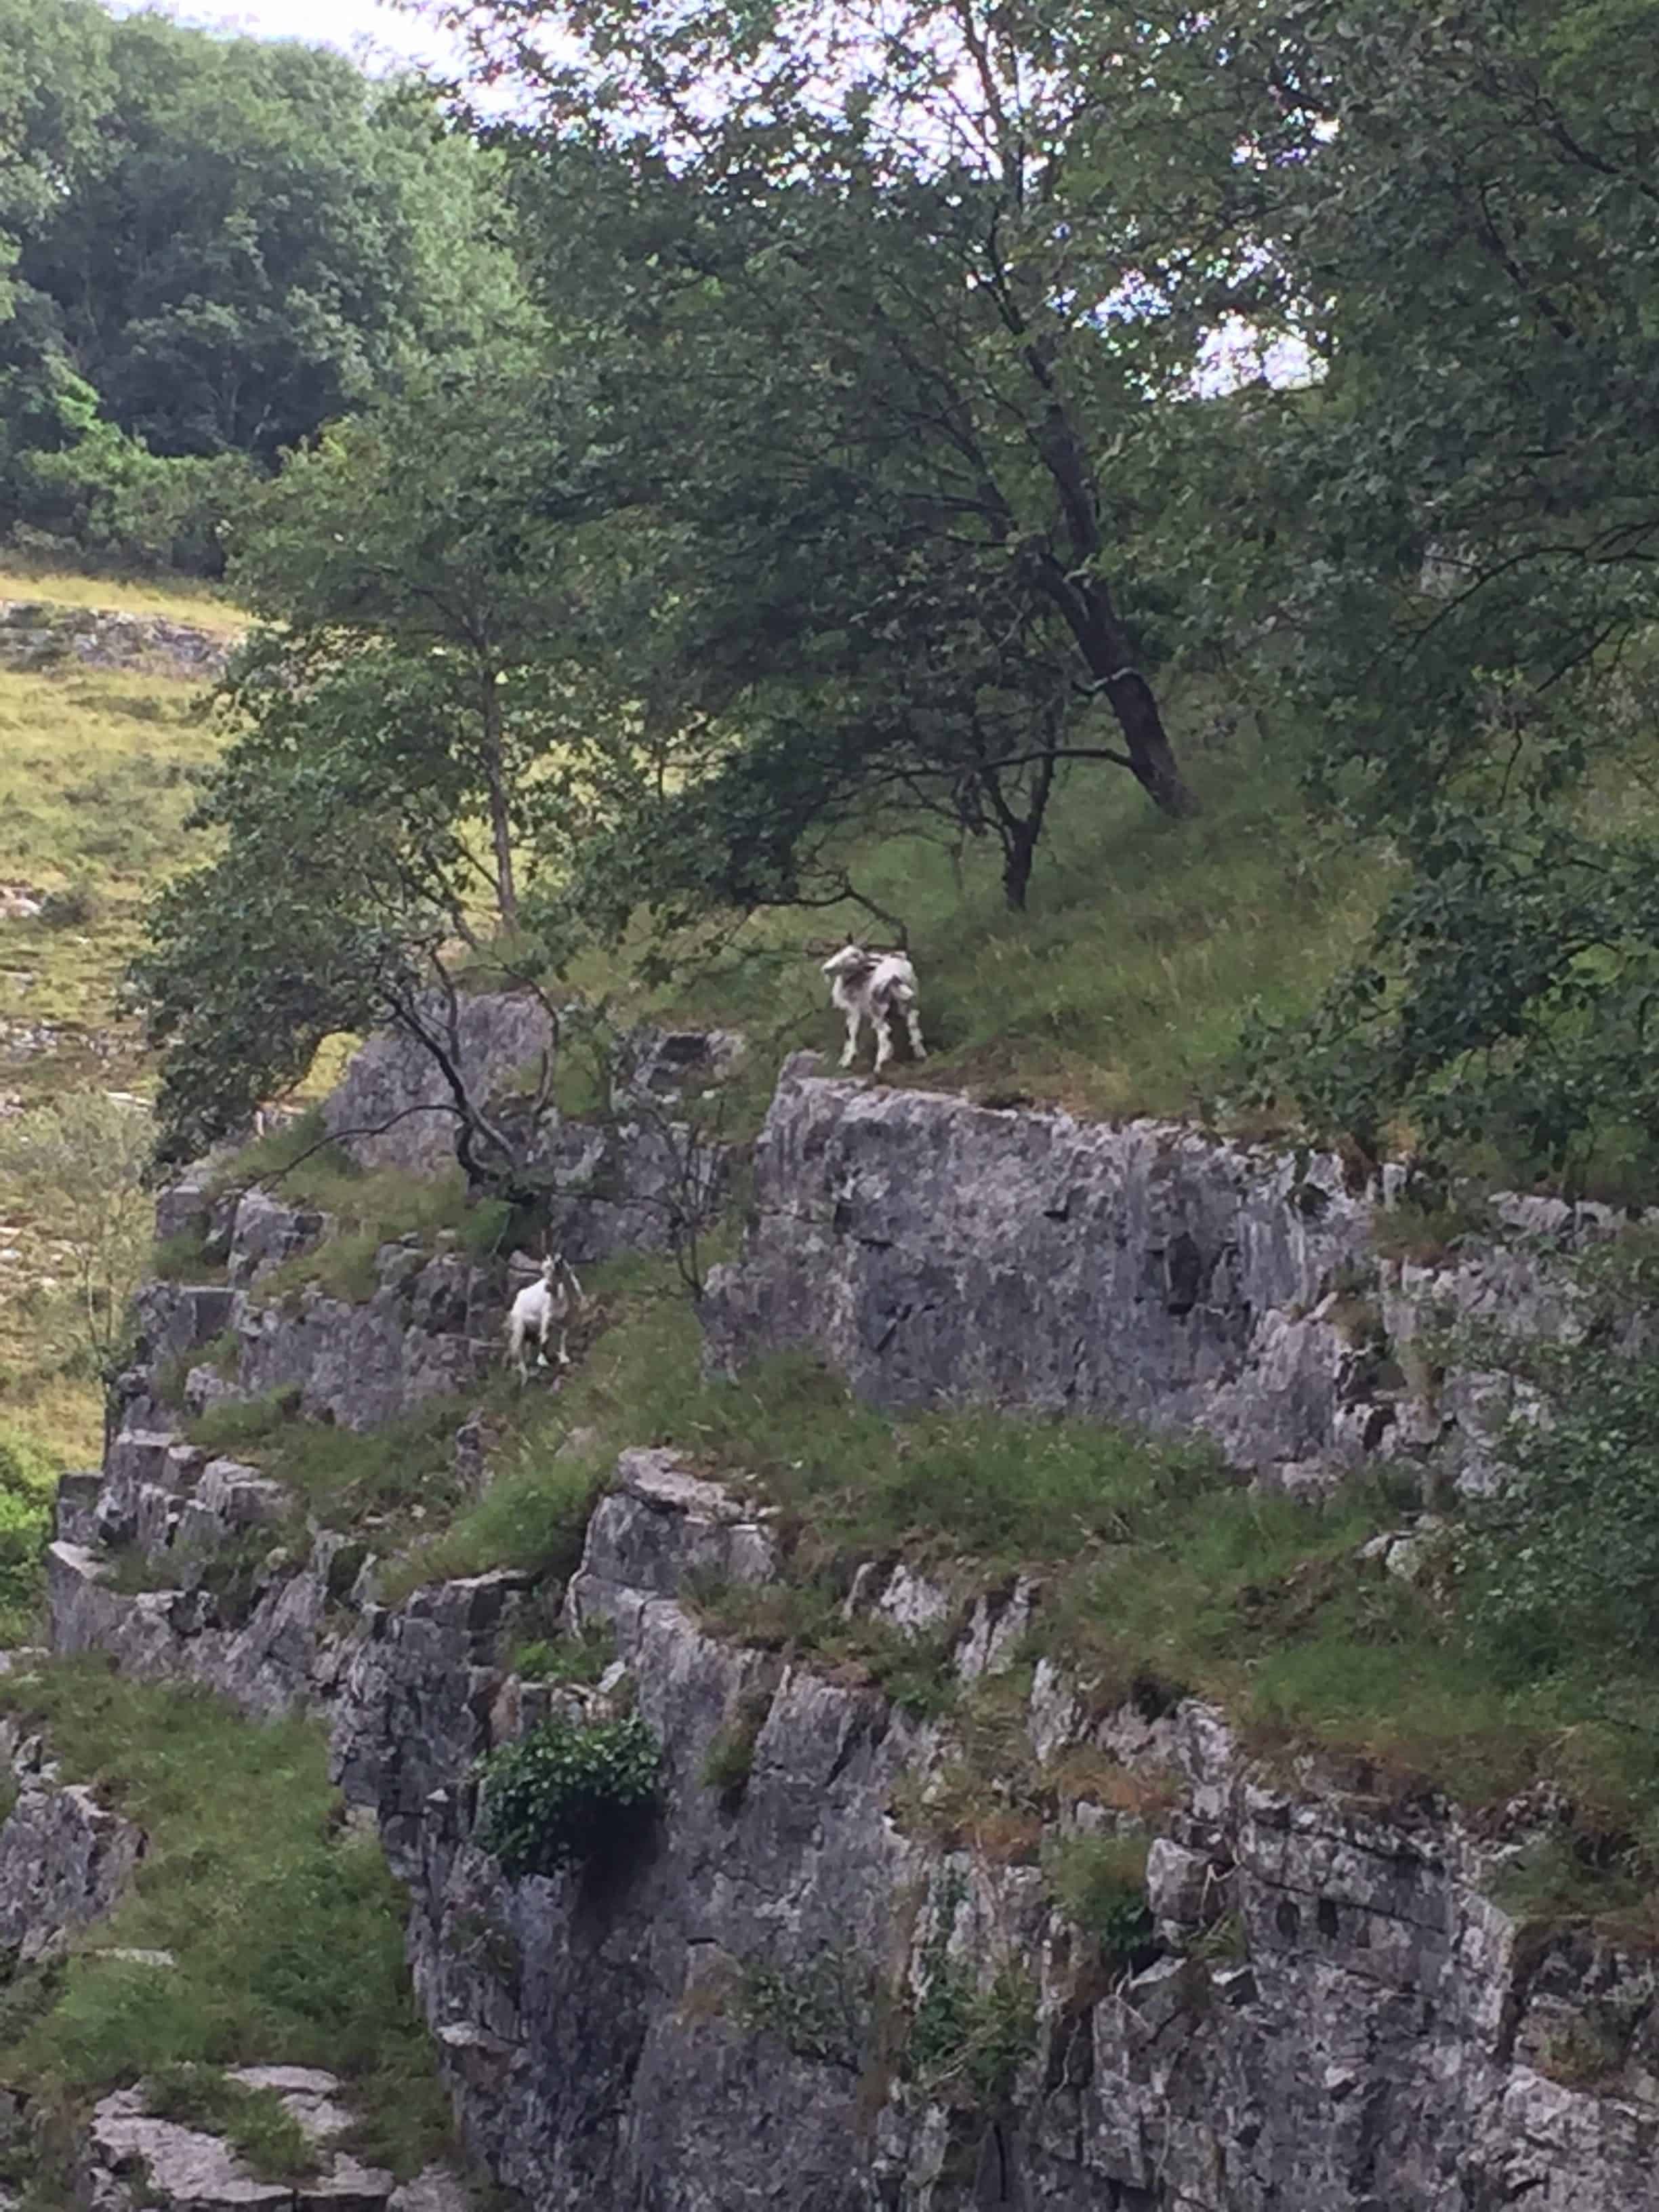 Wild goats at Cheddar Gorge